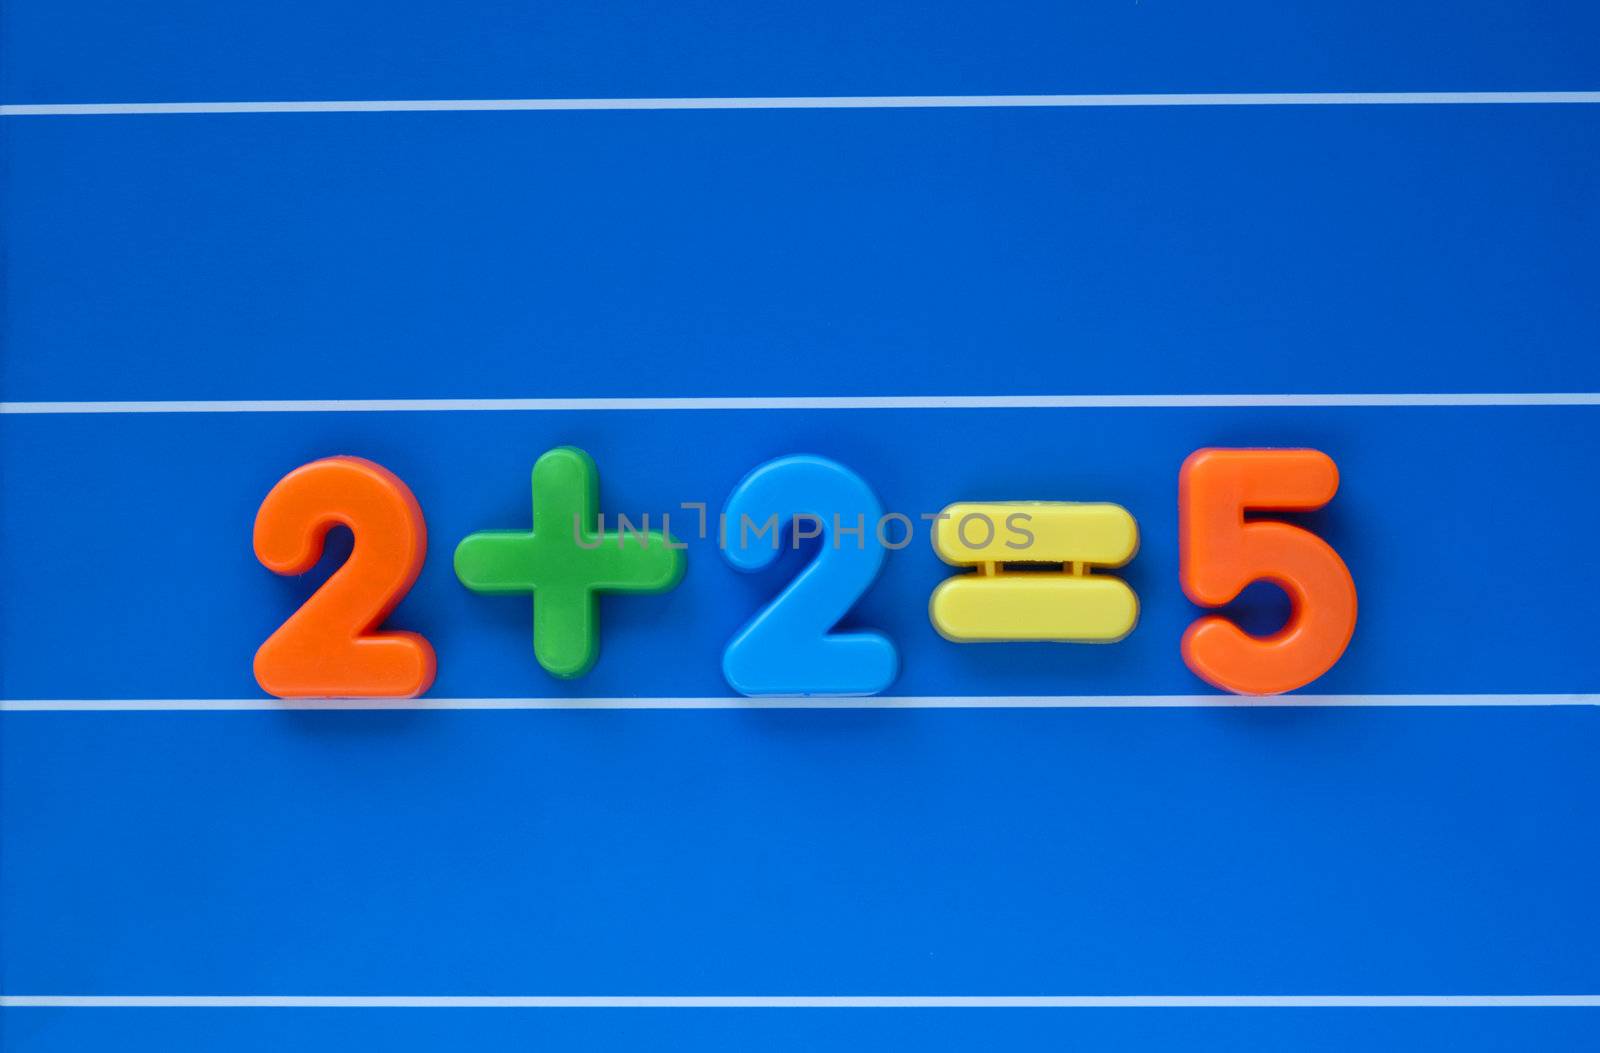 The classic "putting two and two together and getting five", created from a child's toy number set. Sum placed in centre of image.